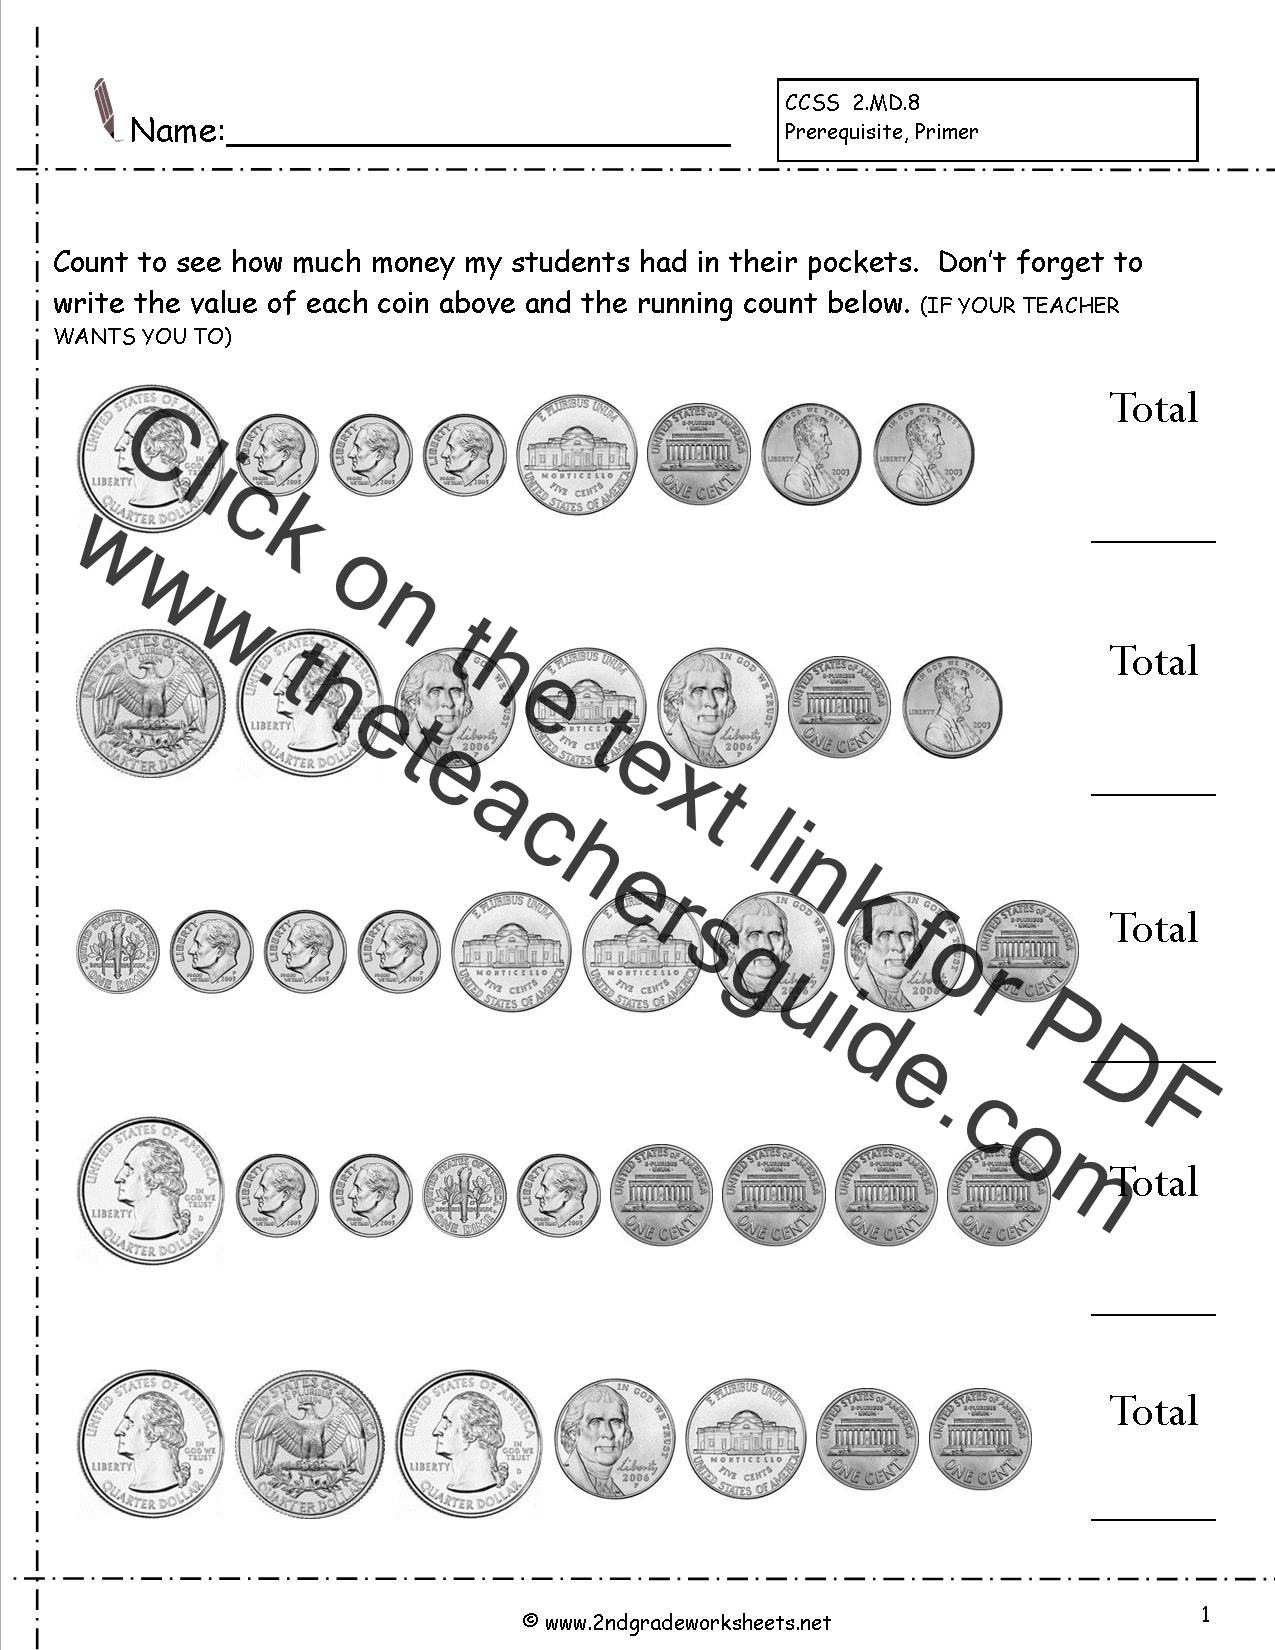 counting-coins-and-money-worksheets-and-printouts